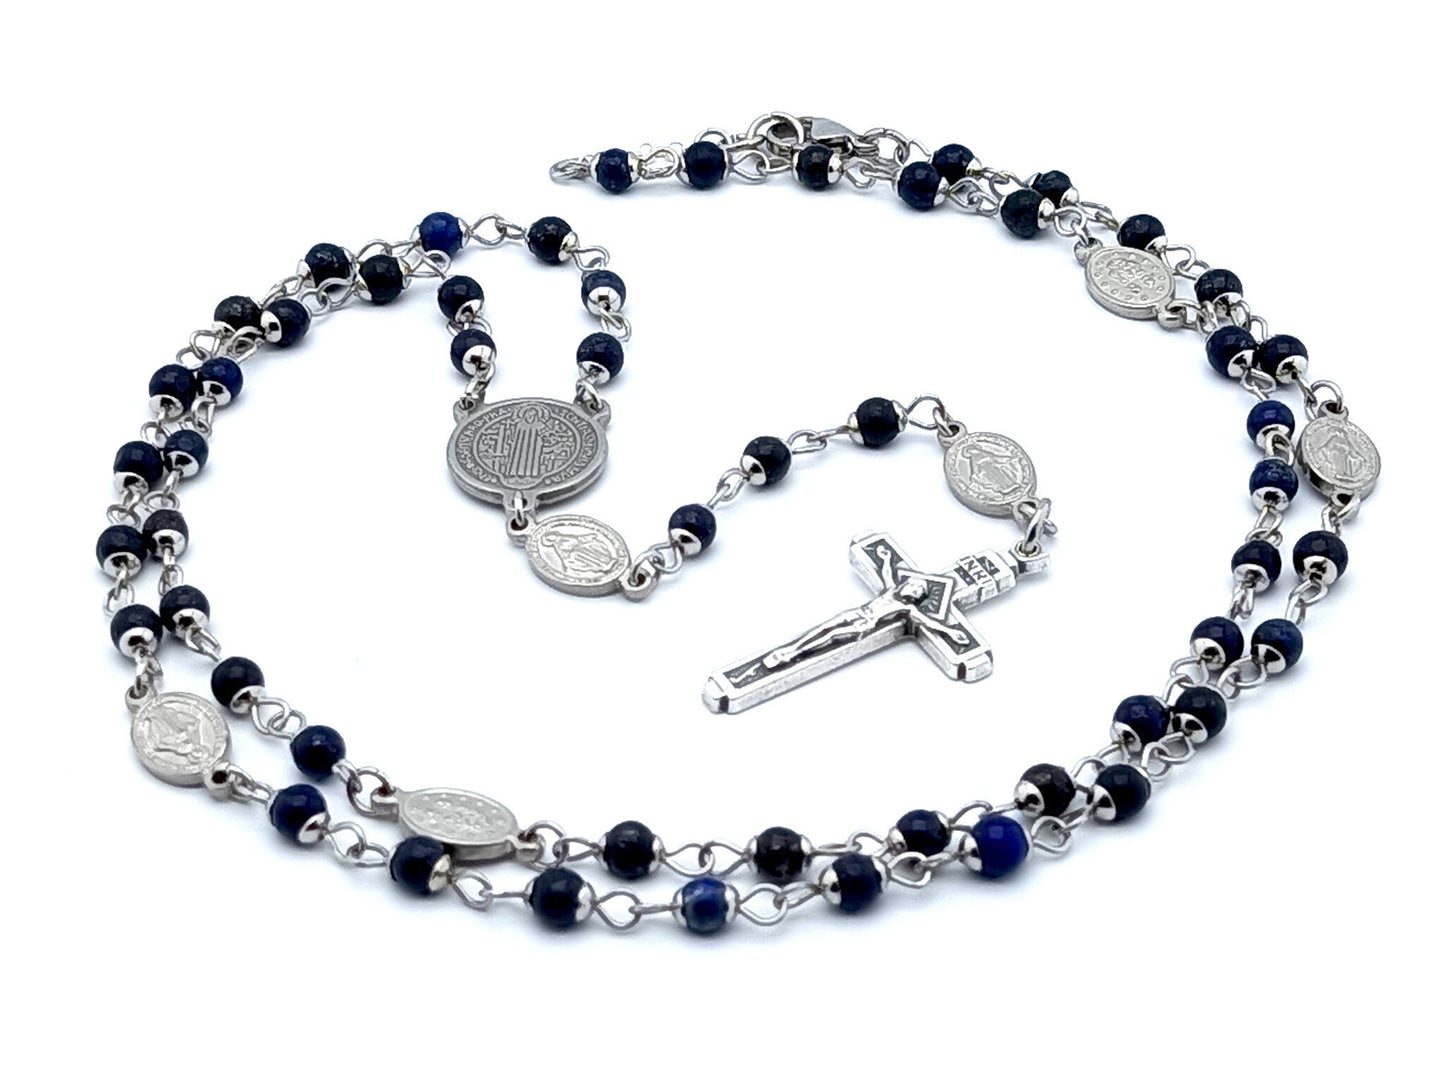 Saint Benedict unique rosary beads with lapis lazuli bead, Miraculous medal pater beads, silver crucifix and stainless steel centre medal.